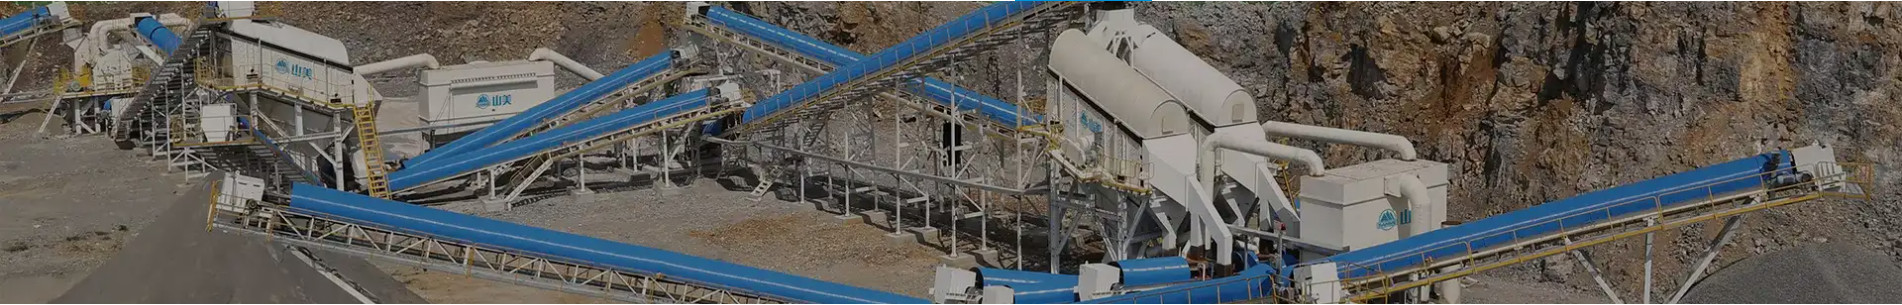 Huaxin Cement 2000T/H aggregate production line EPCO project was put into operation